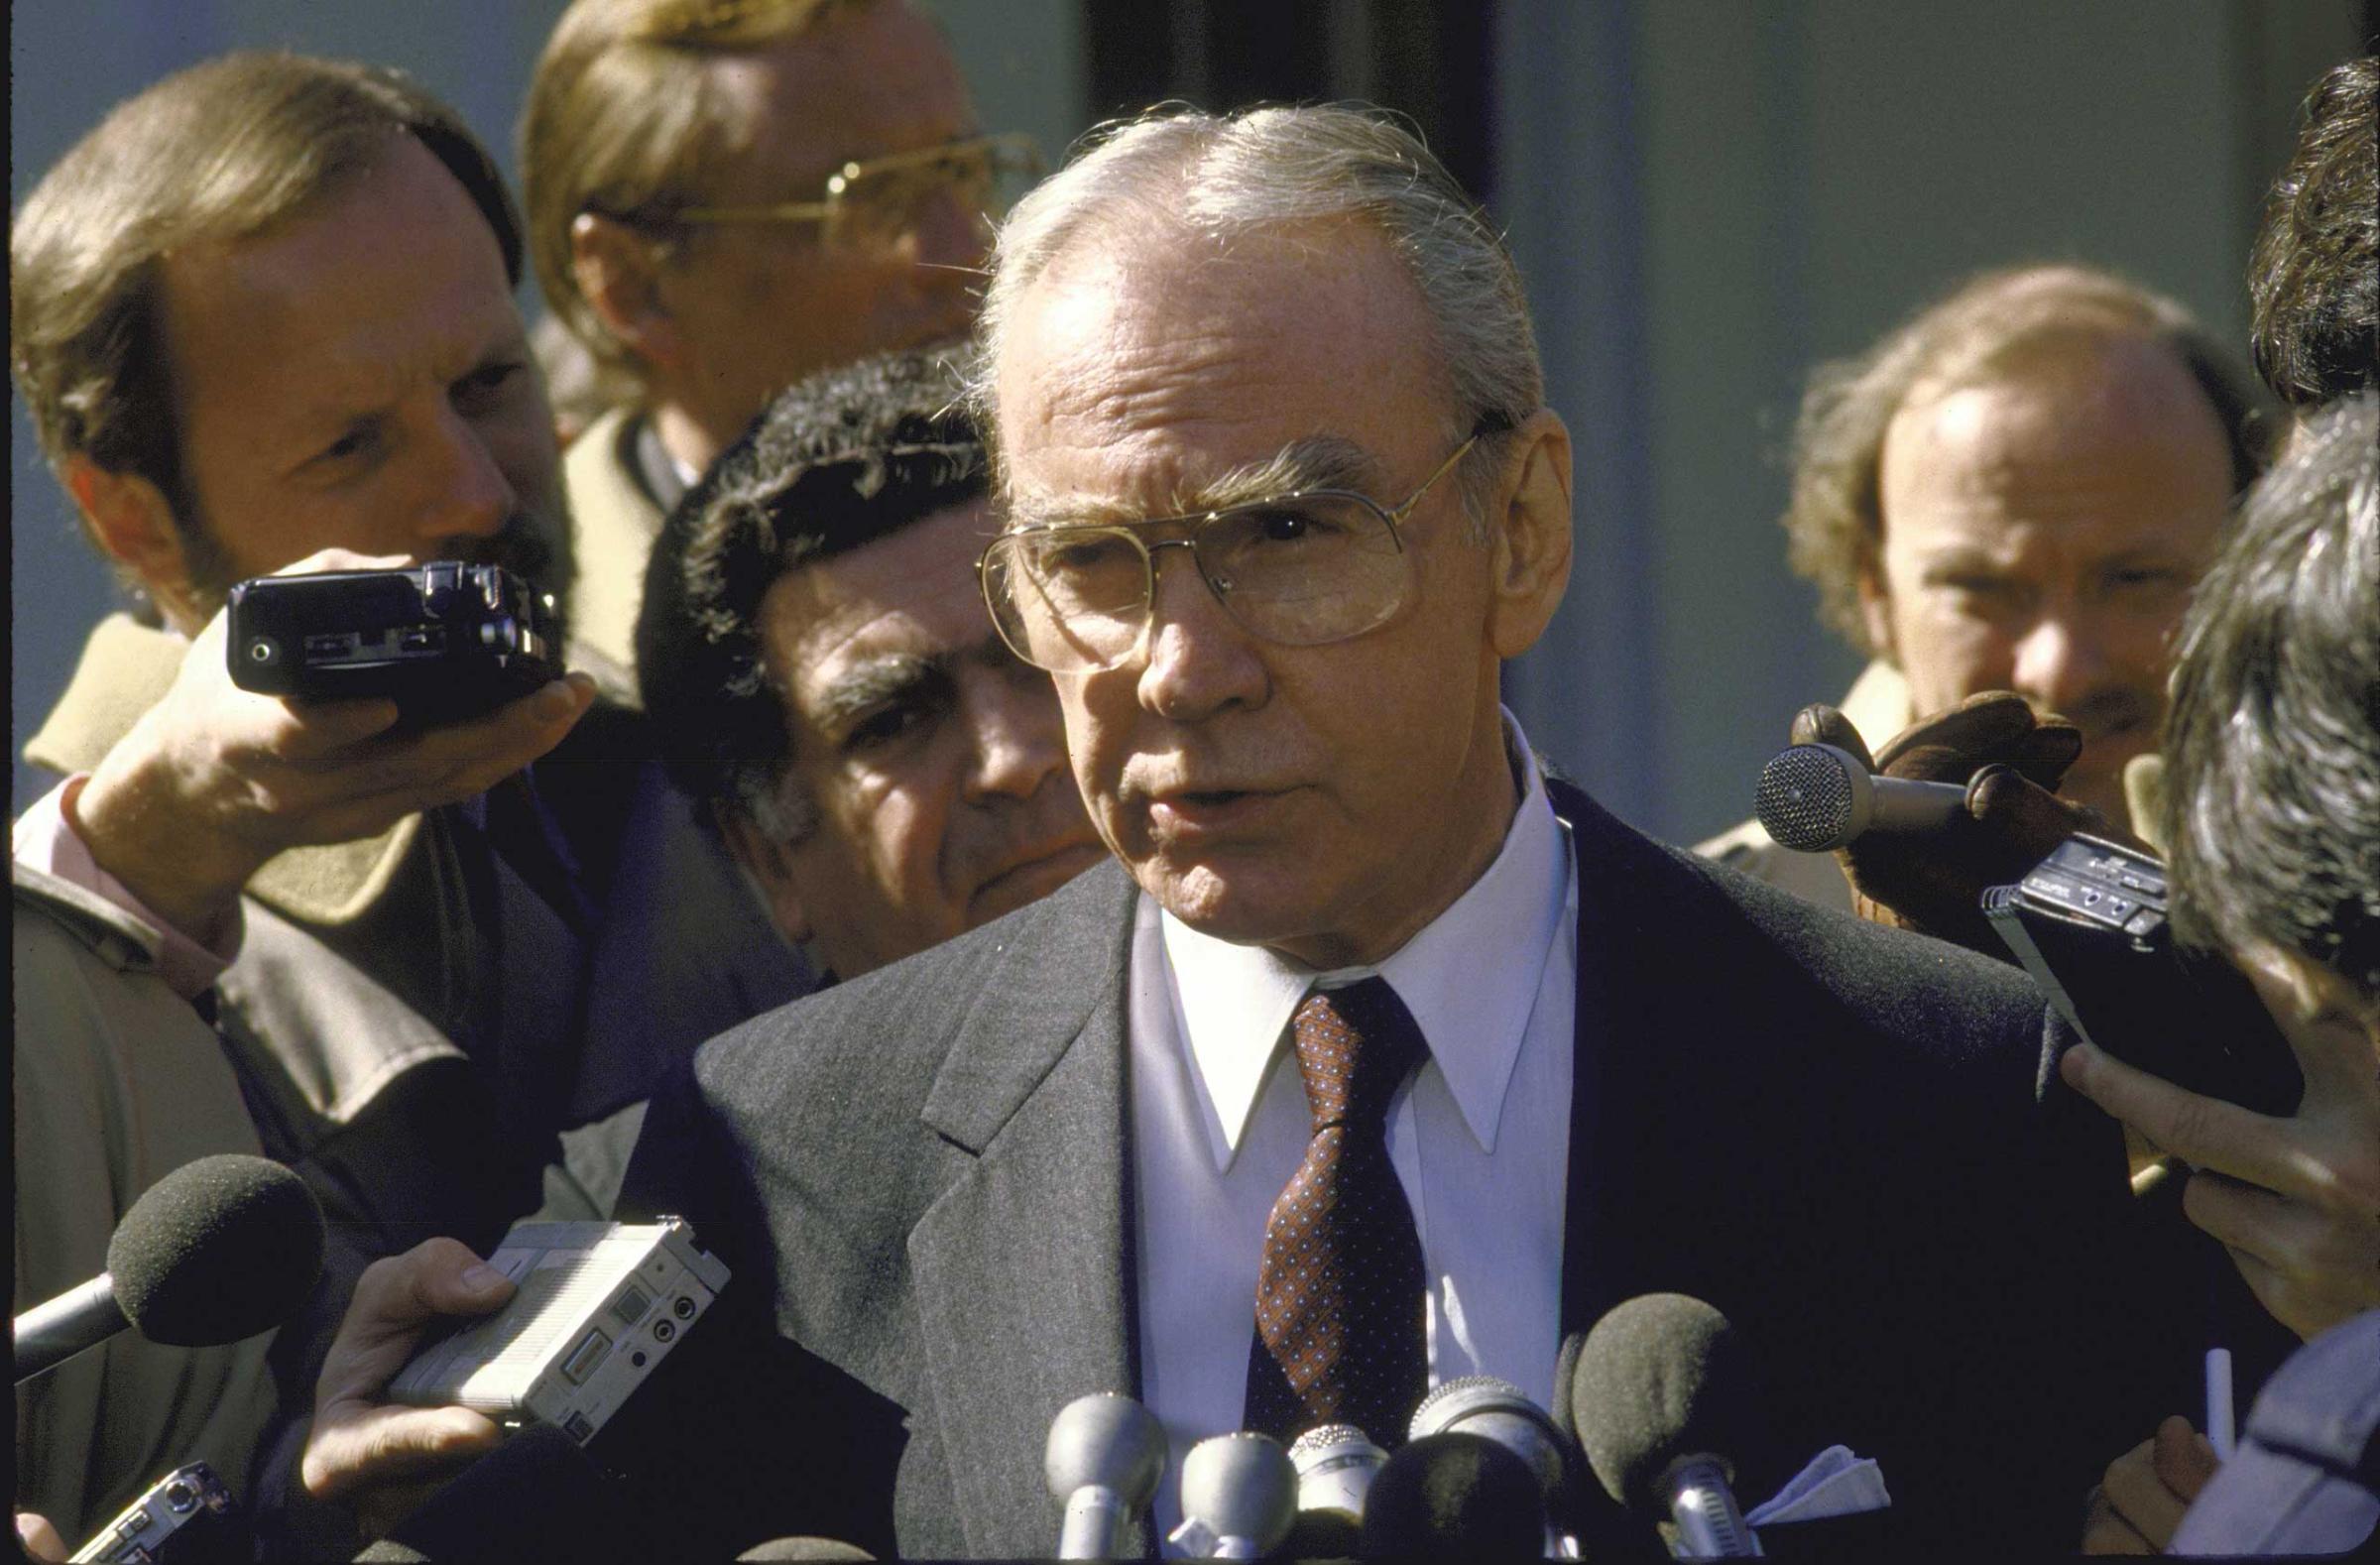 UNITED STATES - MARCH 01: Rep. Jim Wright speaking to press after meeting with President Reagan on Geneva arms talks. (Photo by Diana Walker/Time &amp; Life Pictures/Getty Images)